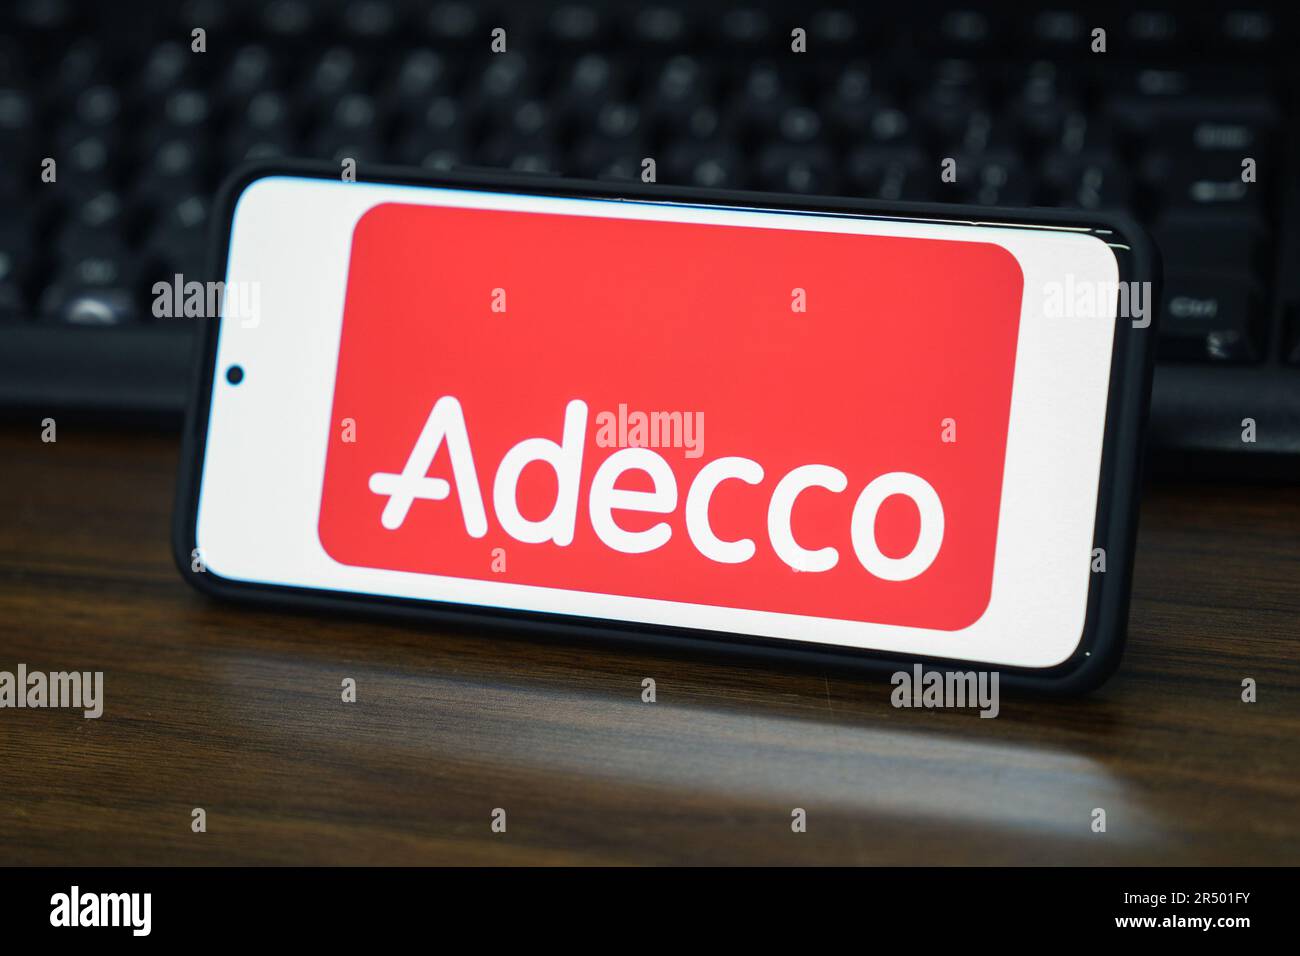 63 Adecco Group Images, Stock Photos & Vectors | Shutterstock